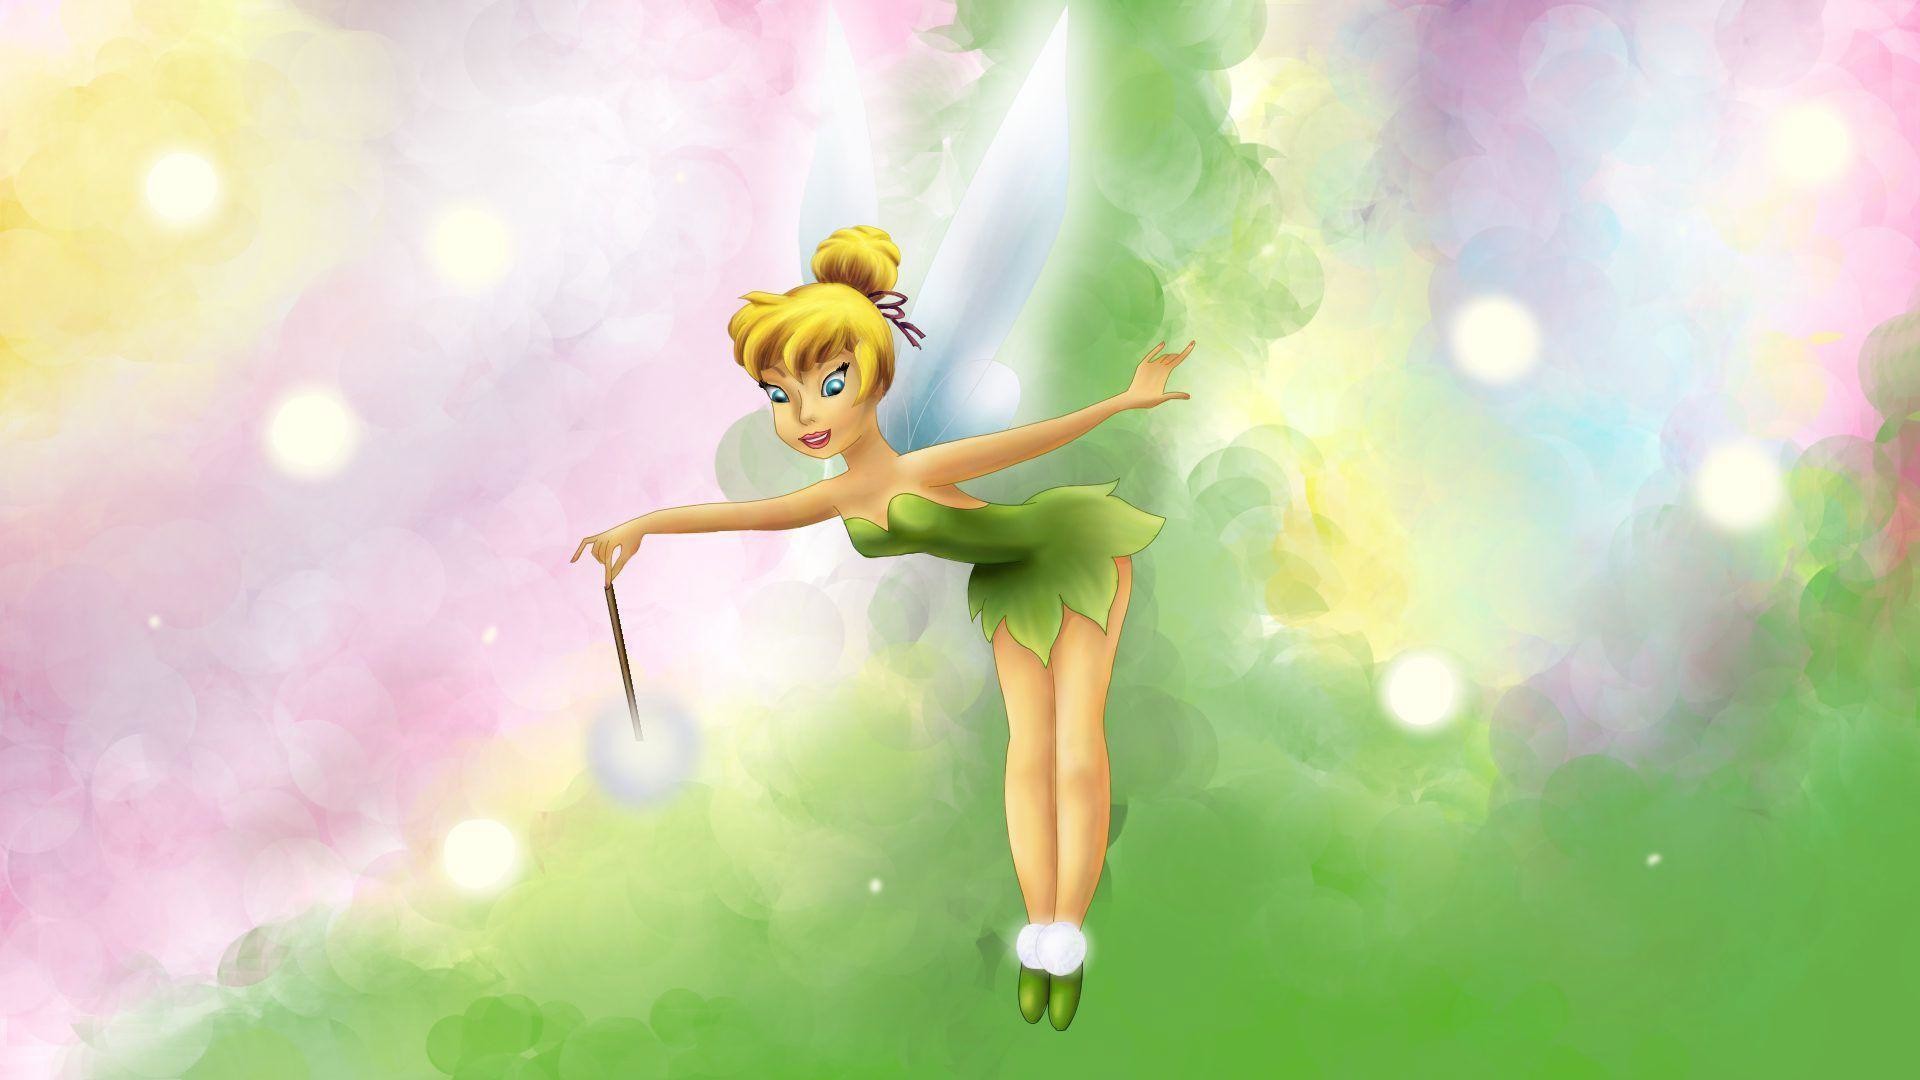 1920x1080 Tinkerbell Wallpapers and Backgrounds - w8themes